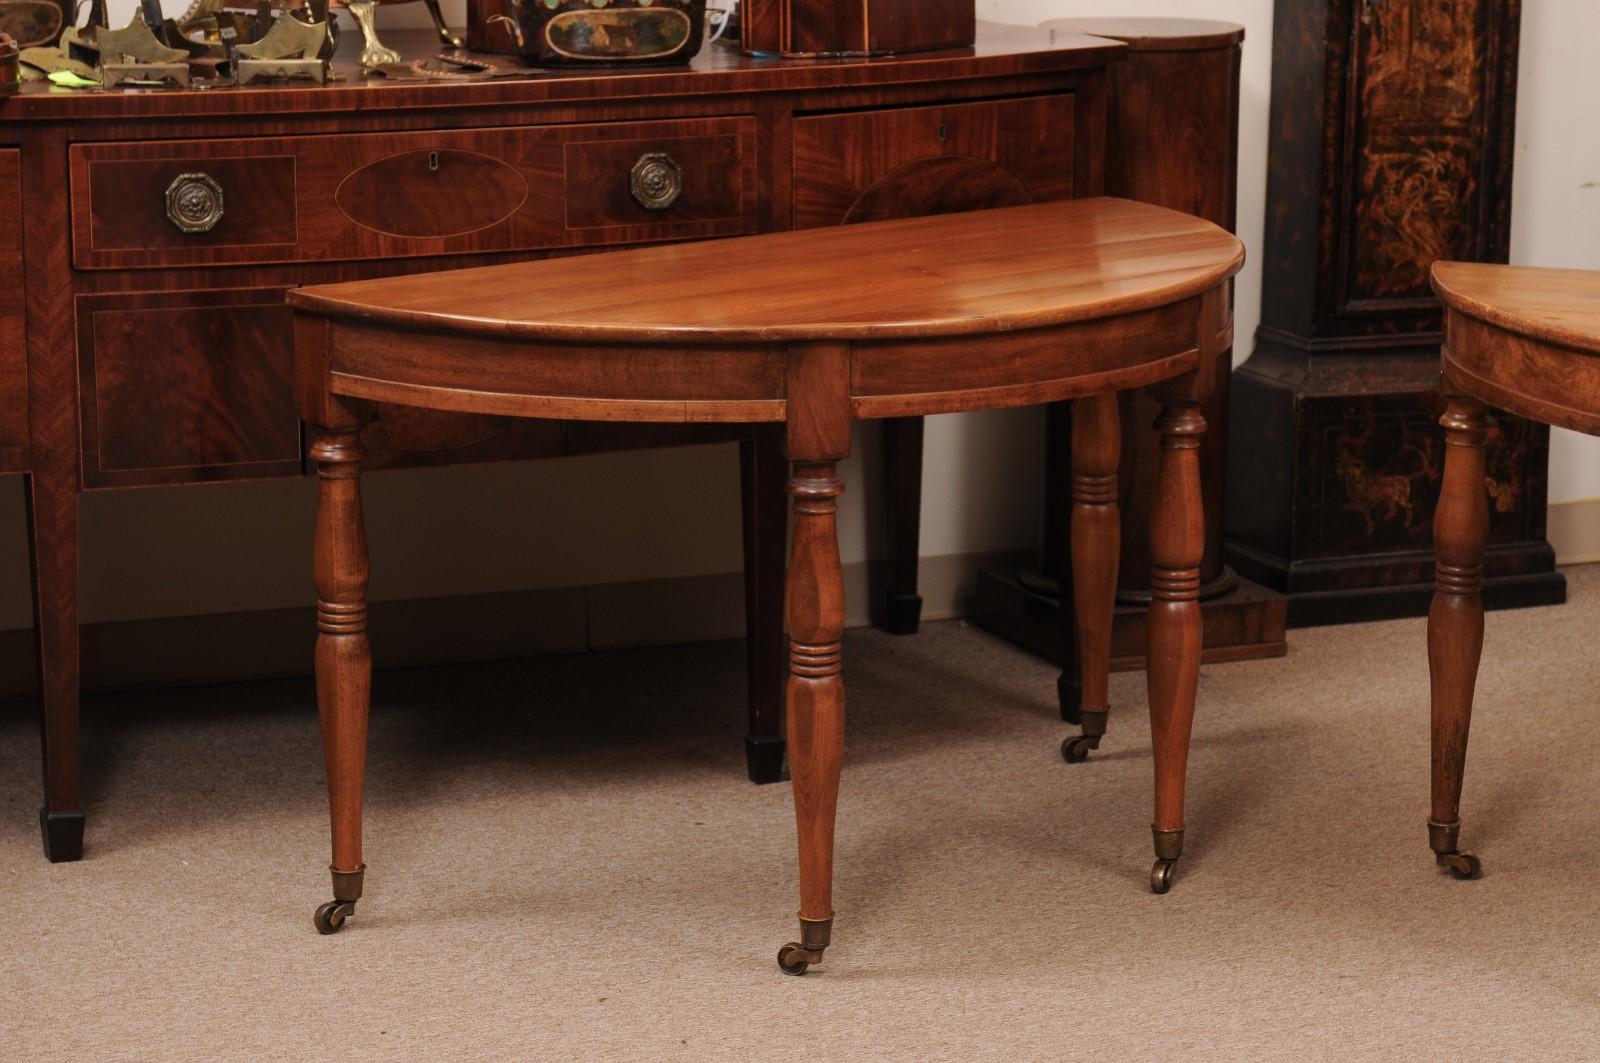 Pair of Matched French Louis Philippe Walnut Demilune Console Tables, 19th Century & Later